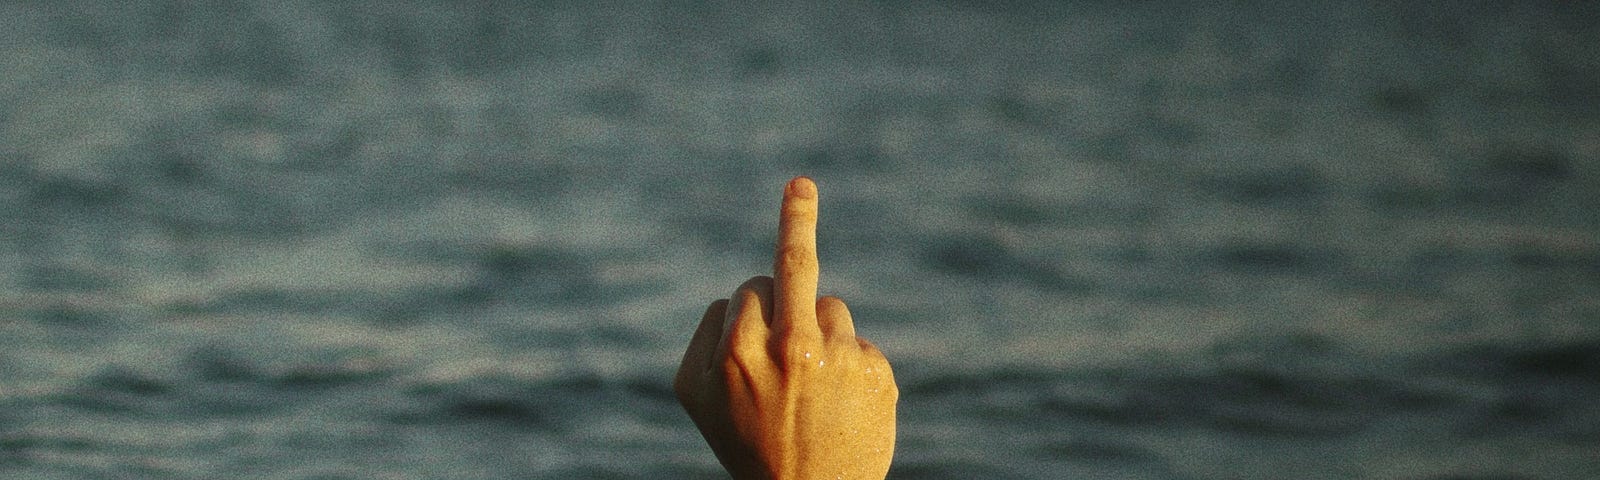 Hand and arm emerging from water with the middle finger salute.